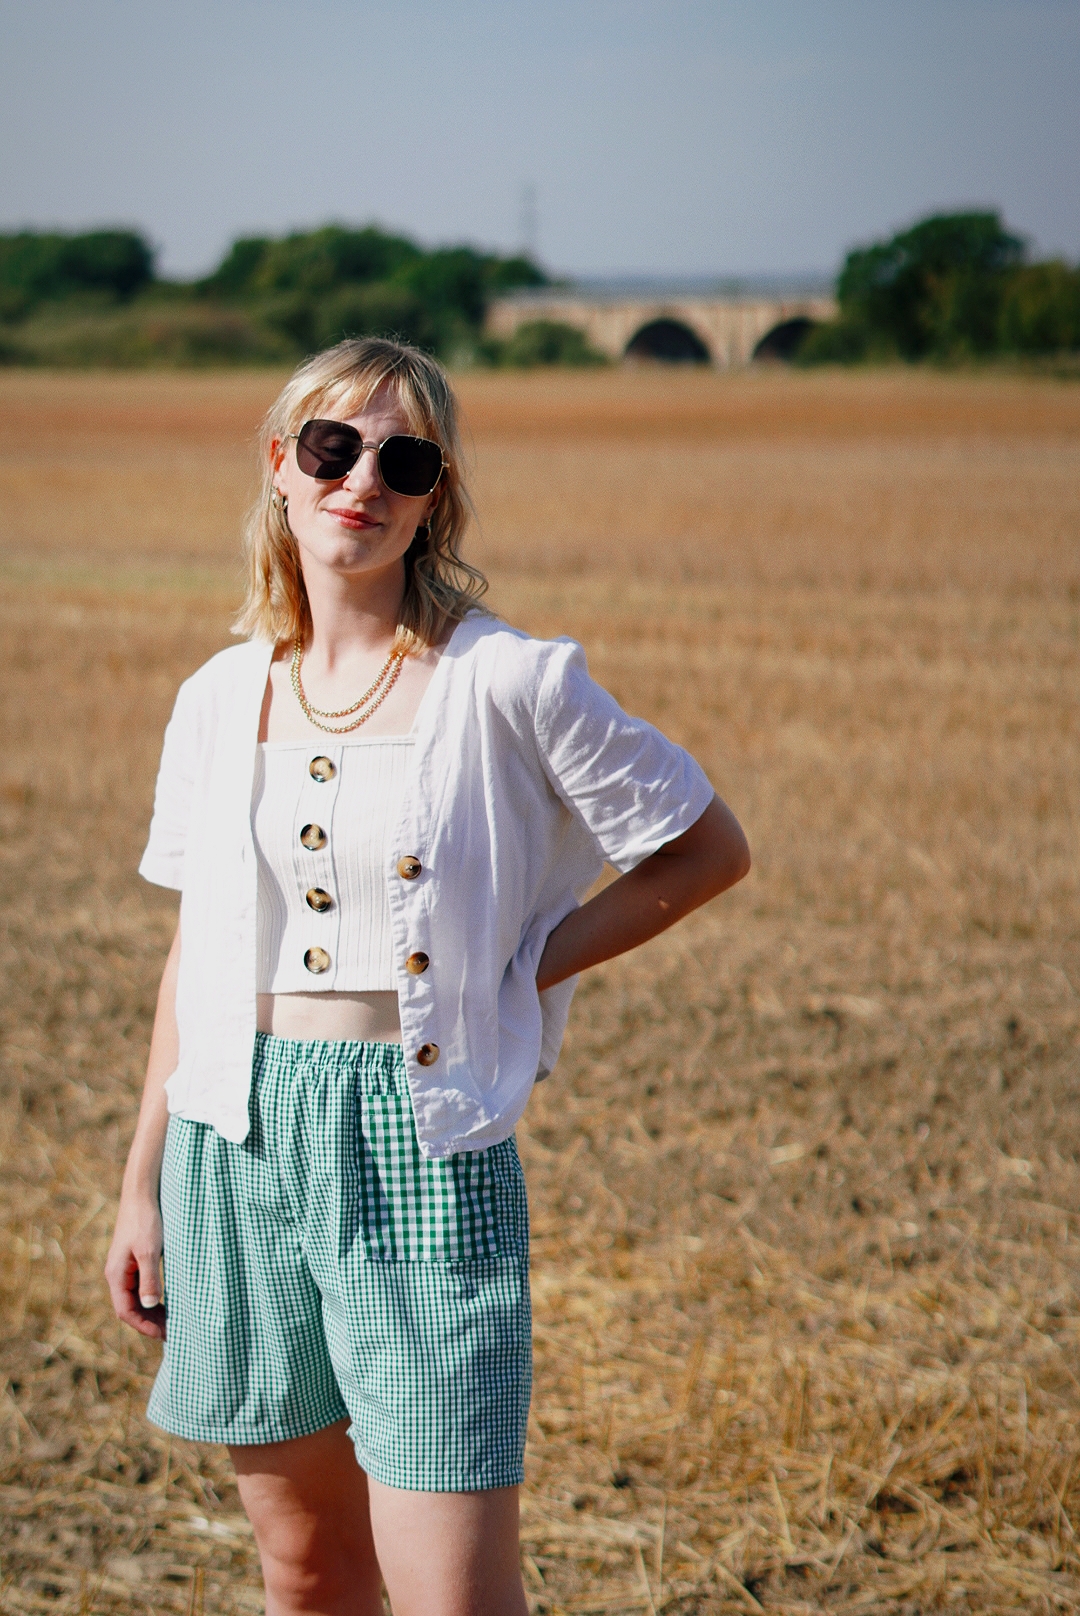 Amy is stood in a wheat field on a sunny day, hand on one hip looking to camera. She is wearing a white shorty sleeved shirt, green gingham shorts and sunglasses.